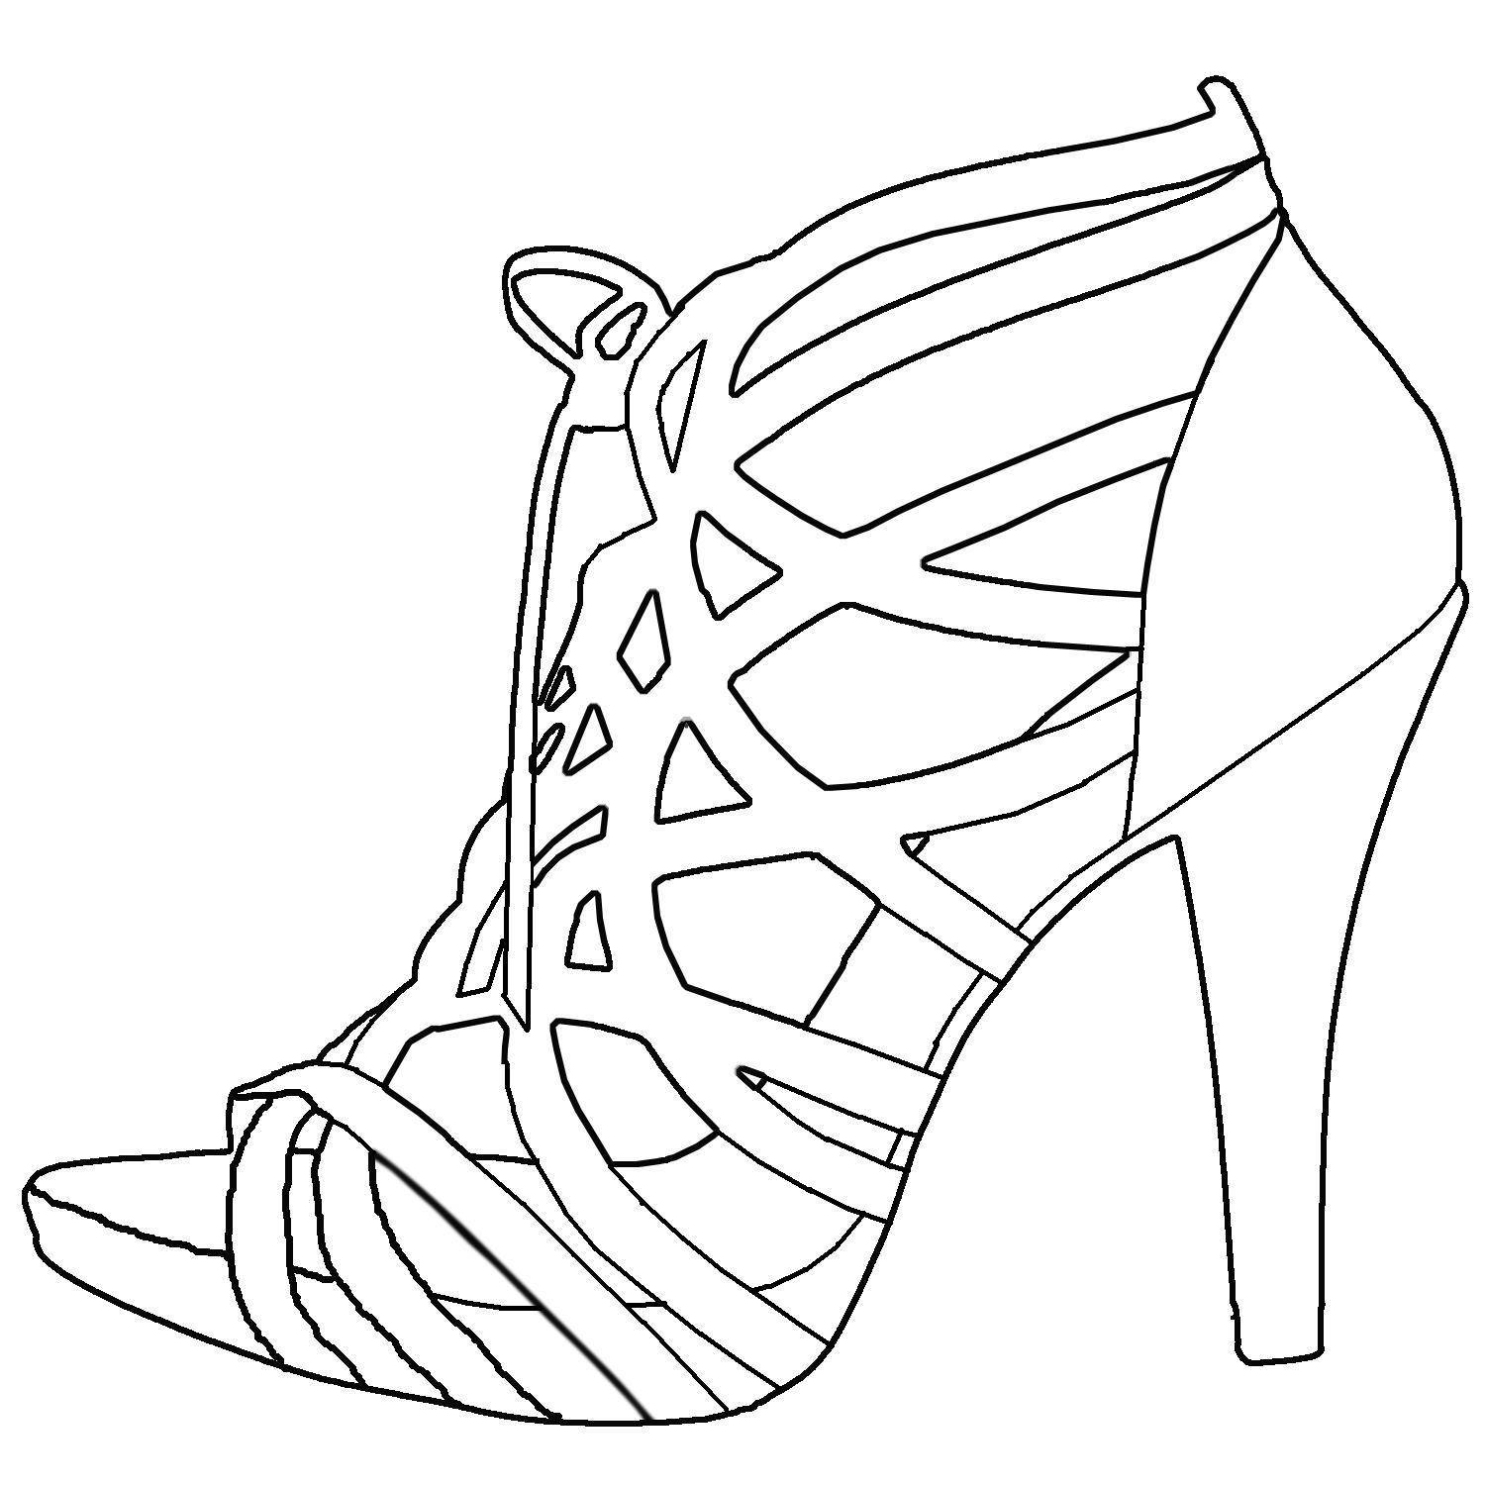 High Heel Drawing Template At Getdrawings | Free Download With High Heel Shoe Template For Card